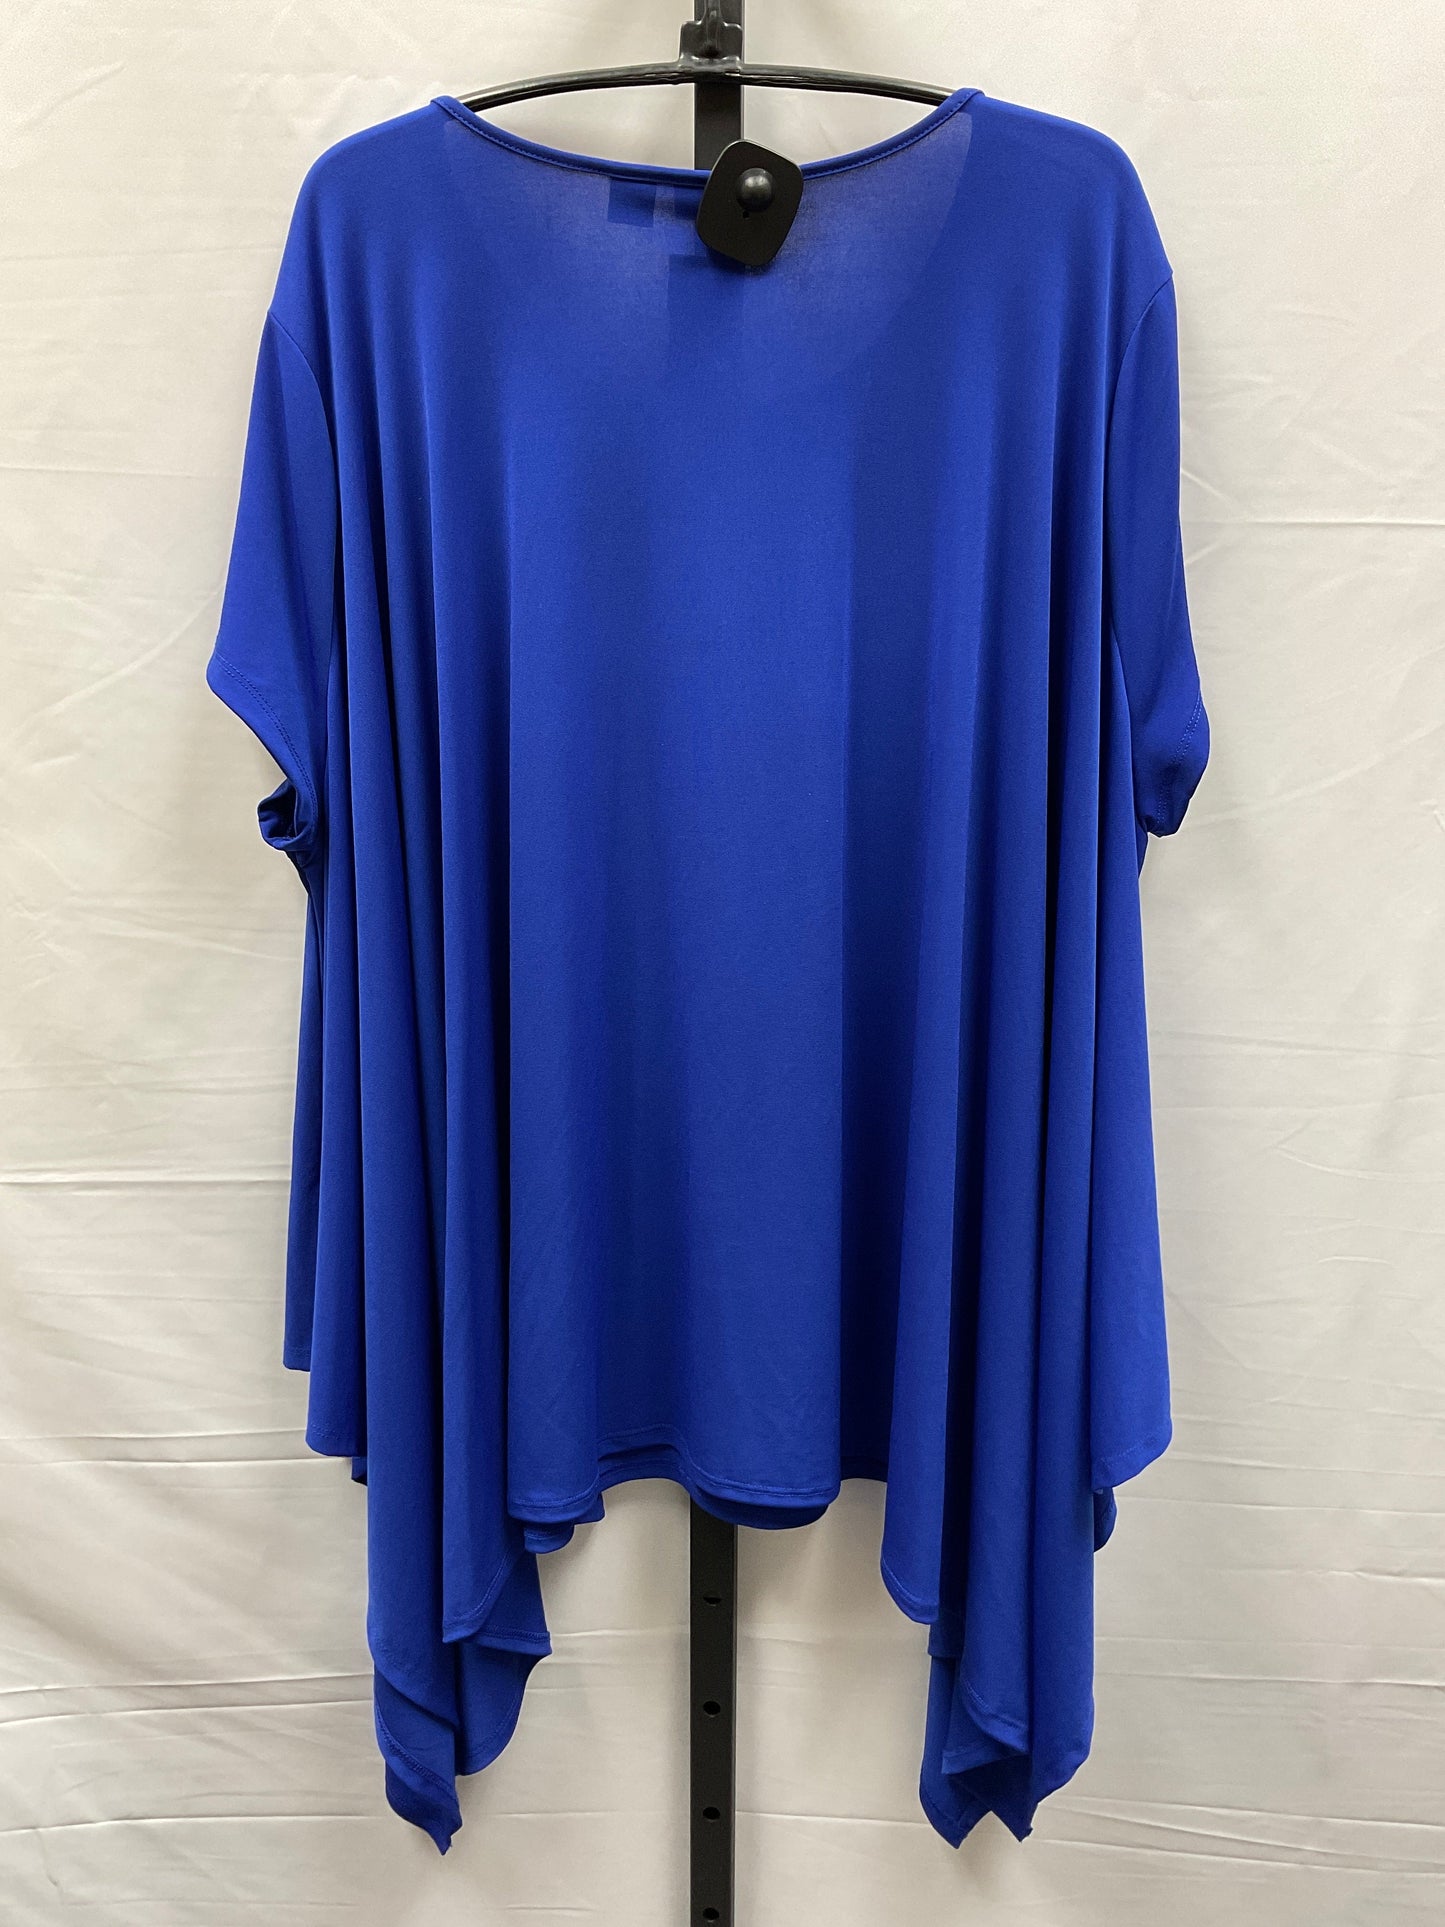 Blue Top Short Sleeve Cato, Size Xl